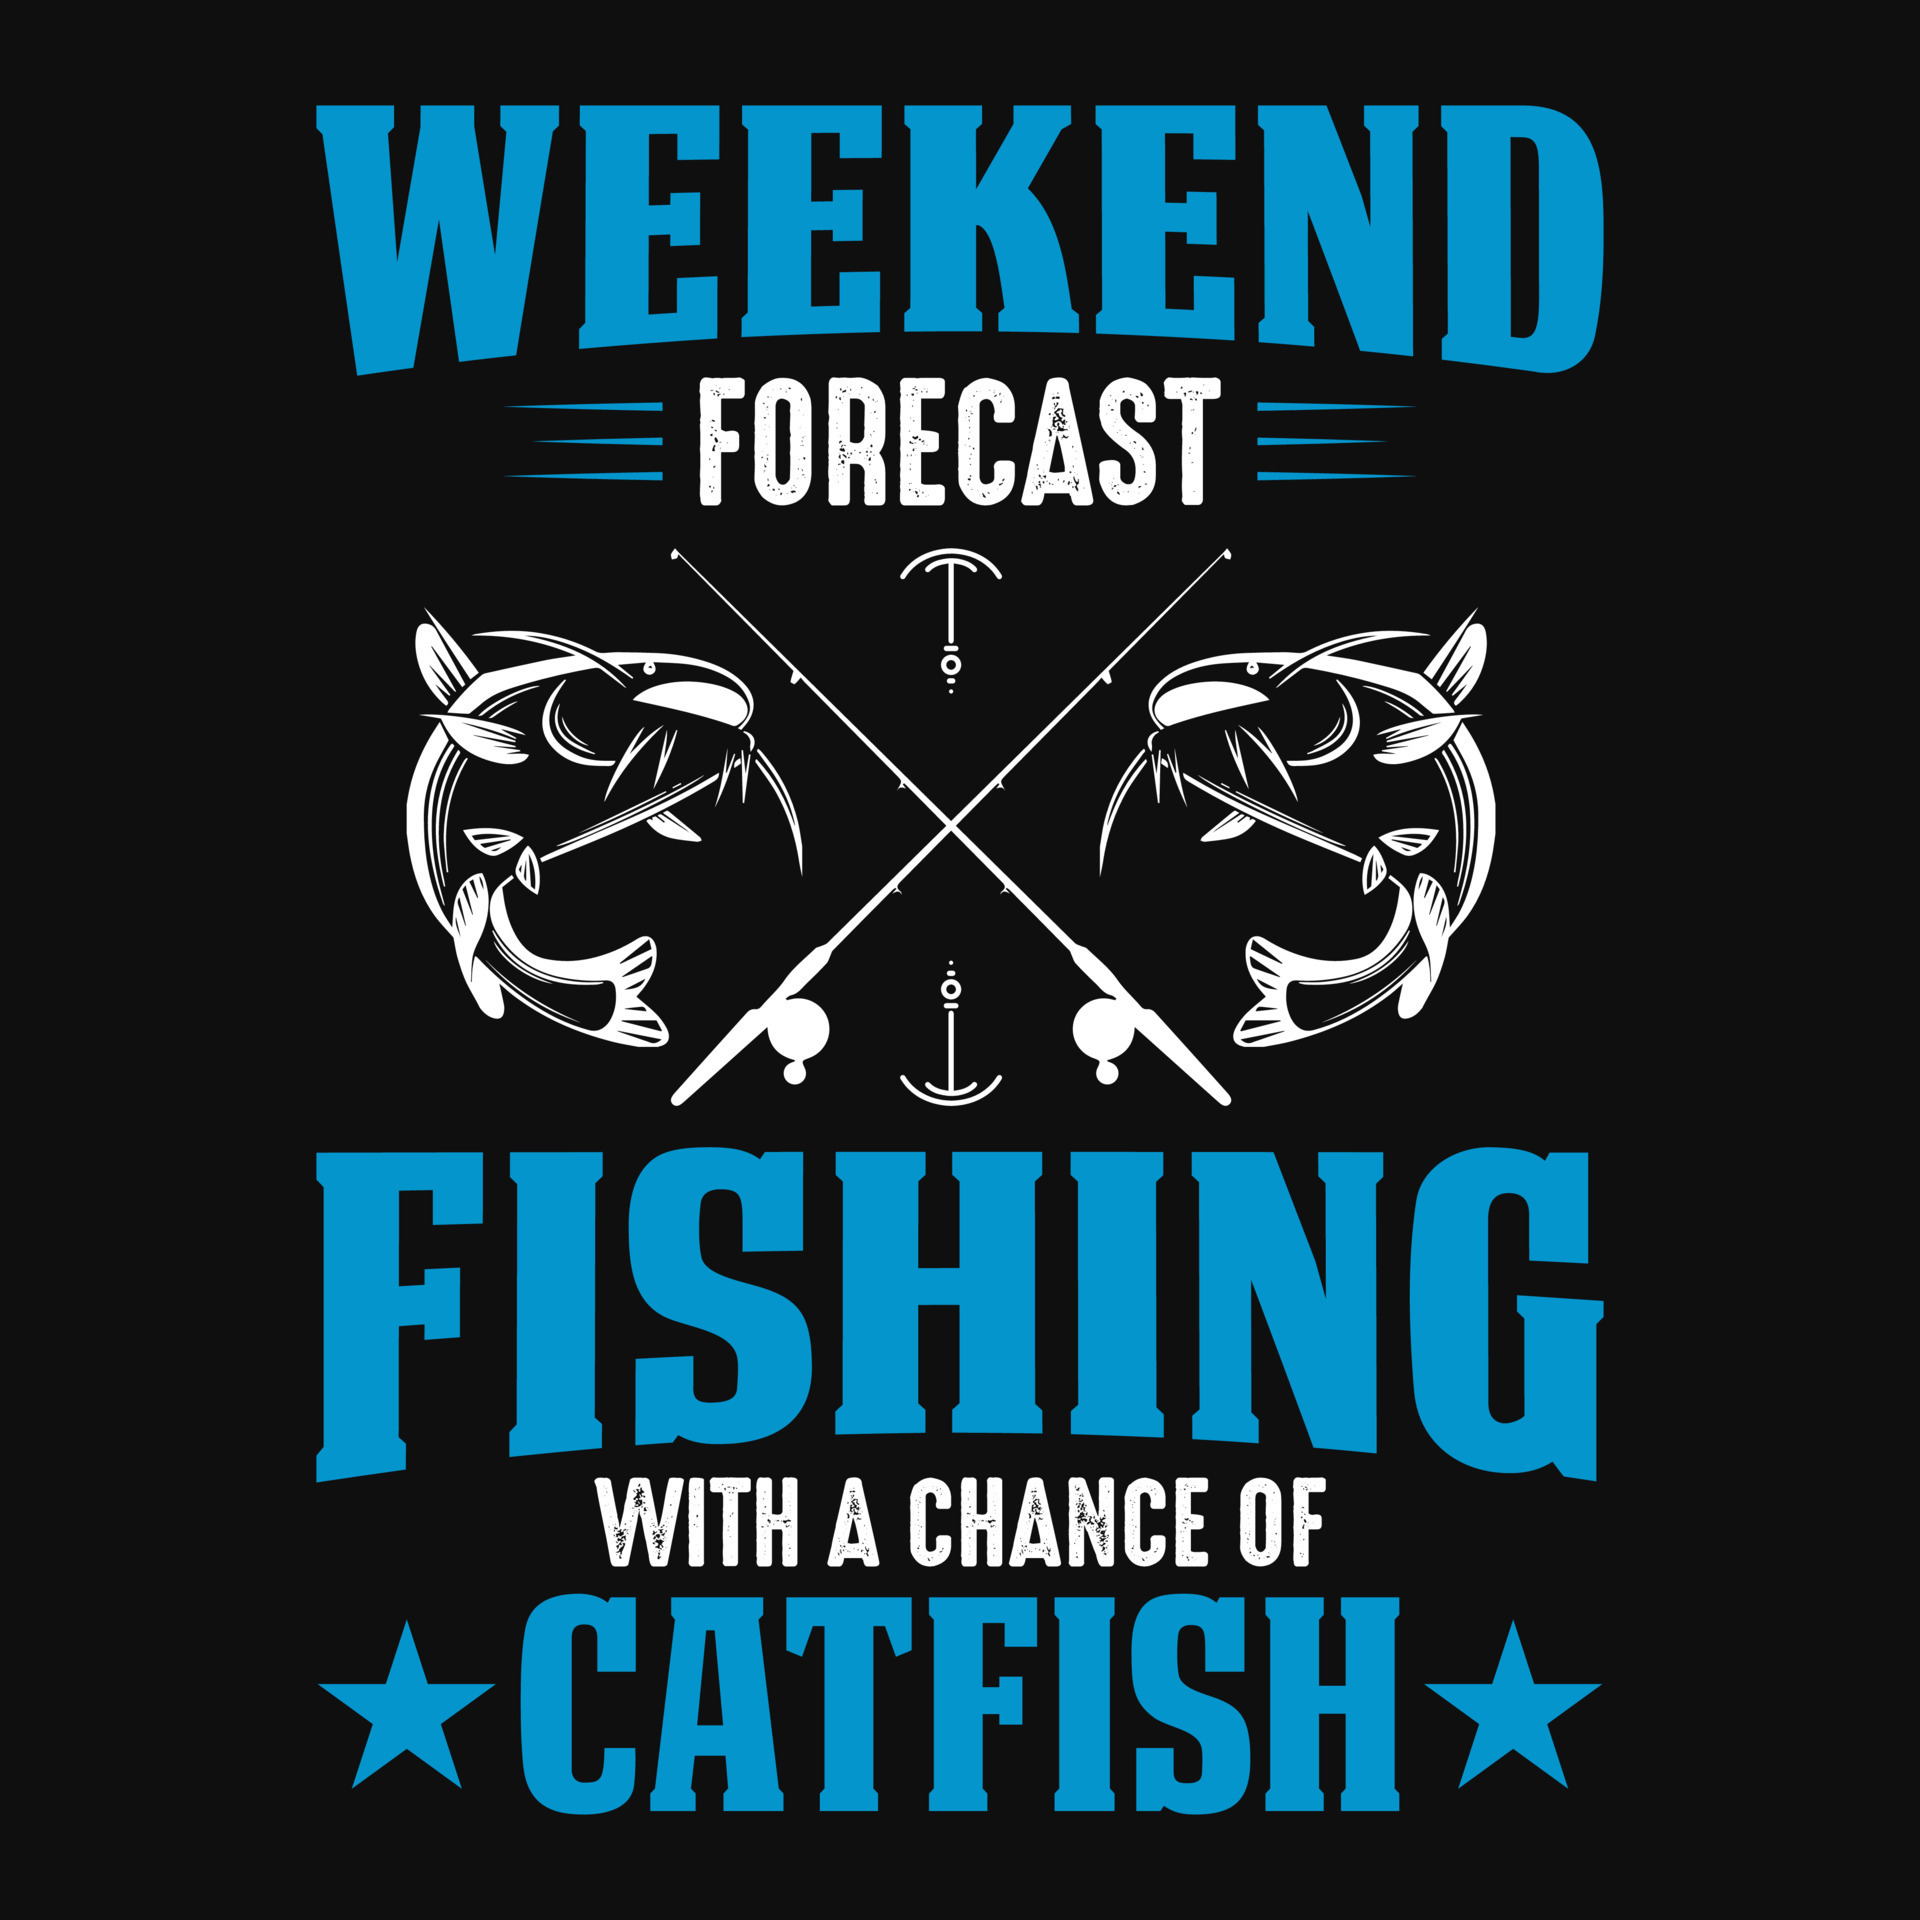 Weekend forecast fishing with a chance of catfish - fishing t